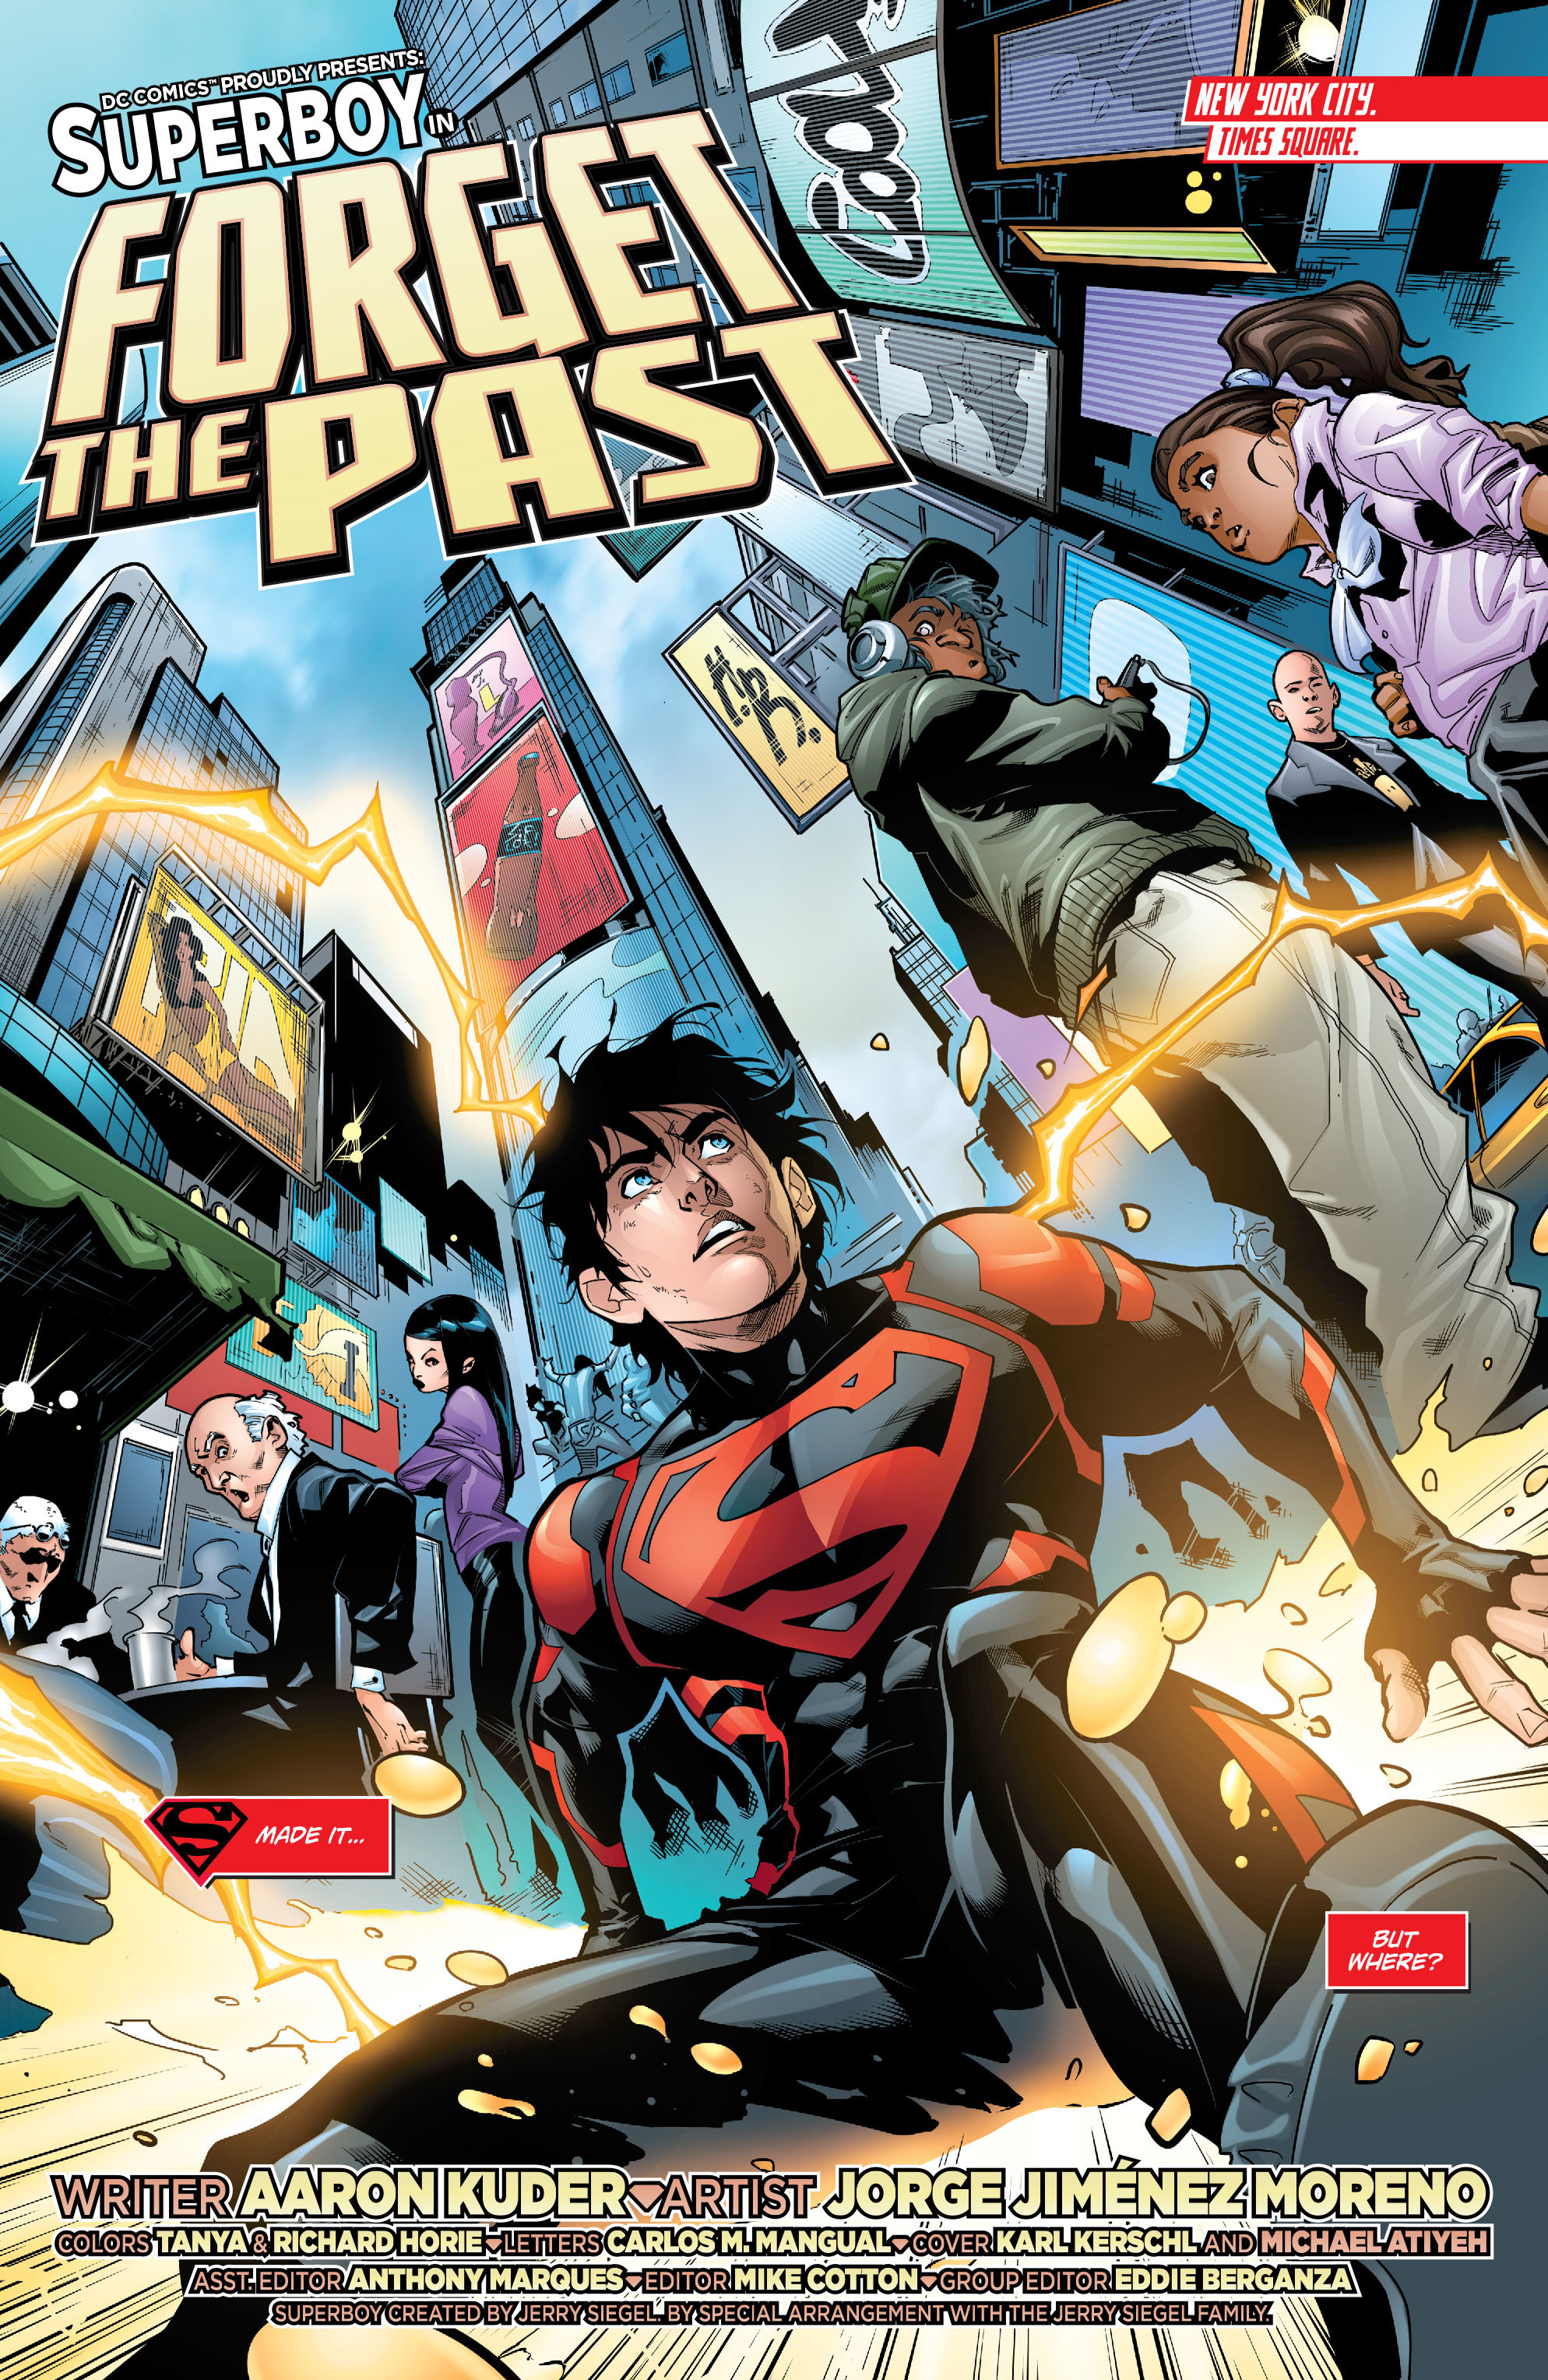 Superboy Ii Issue 30 | Read Superboy Ii Issue 30 comic online in 